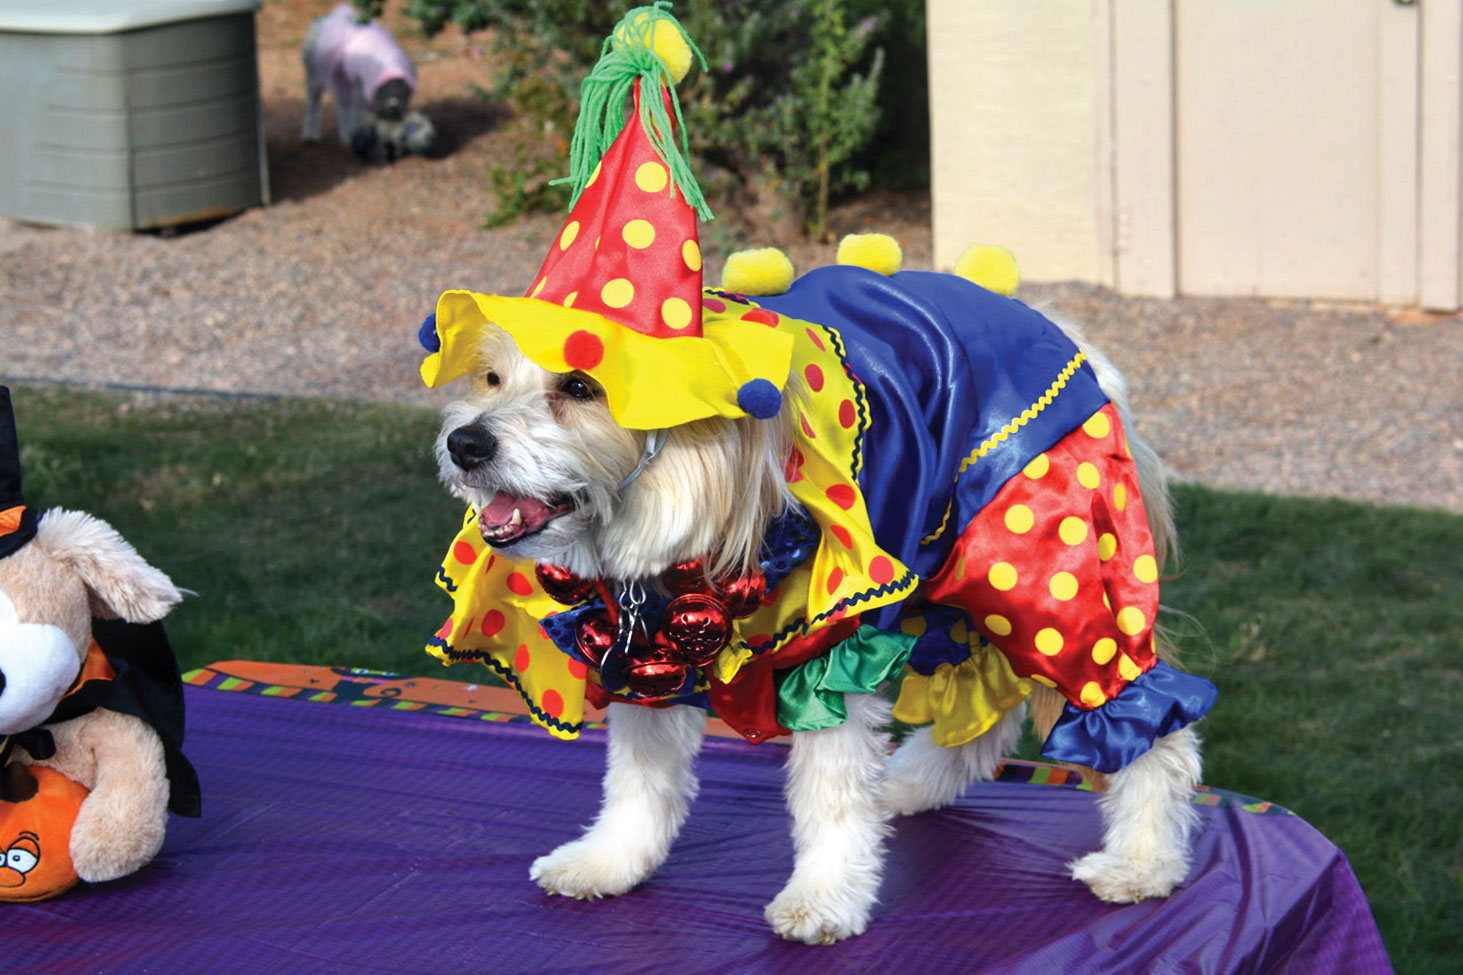 Top Dogs: Molly the Housewife and Nicky the Clown shared first prize for best costume at the SaddleBrooke Dog Park Association Halloween costume contest; photos by Al Majer